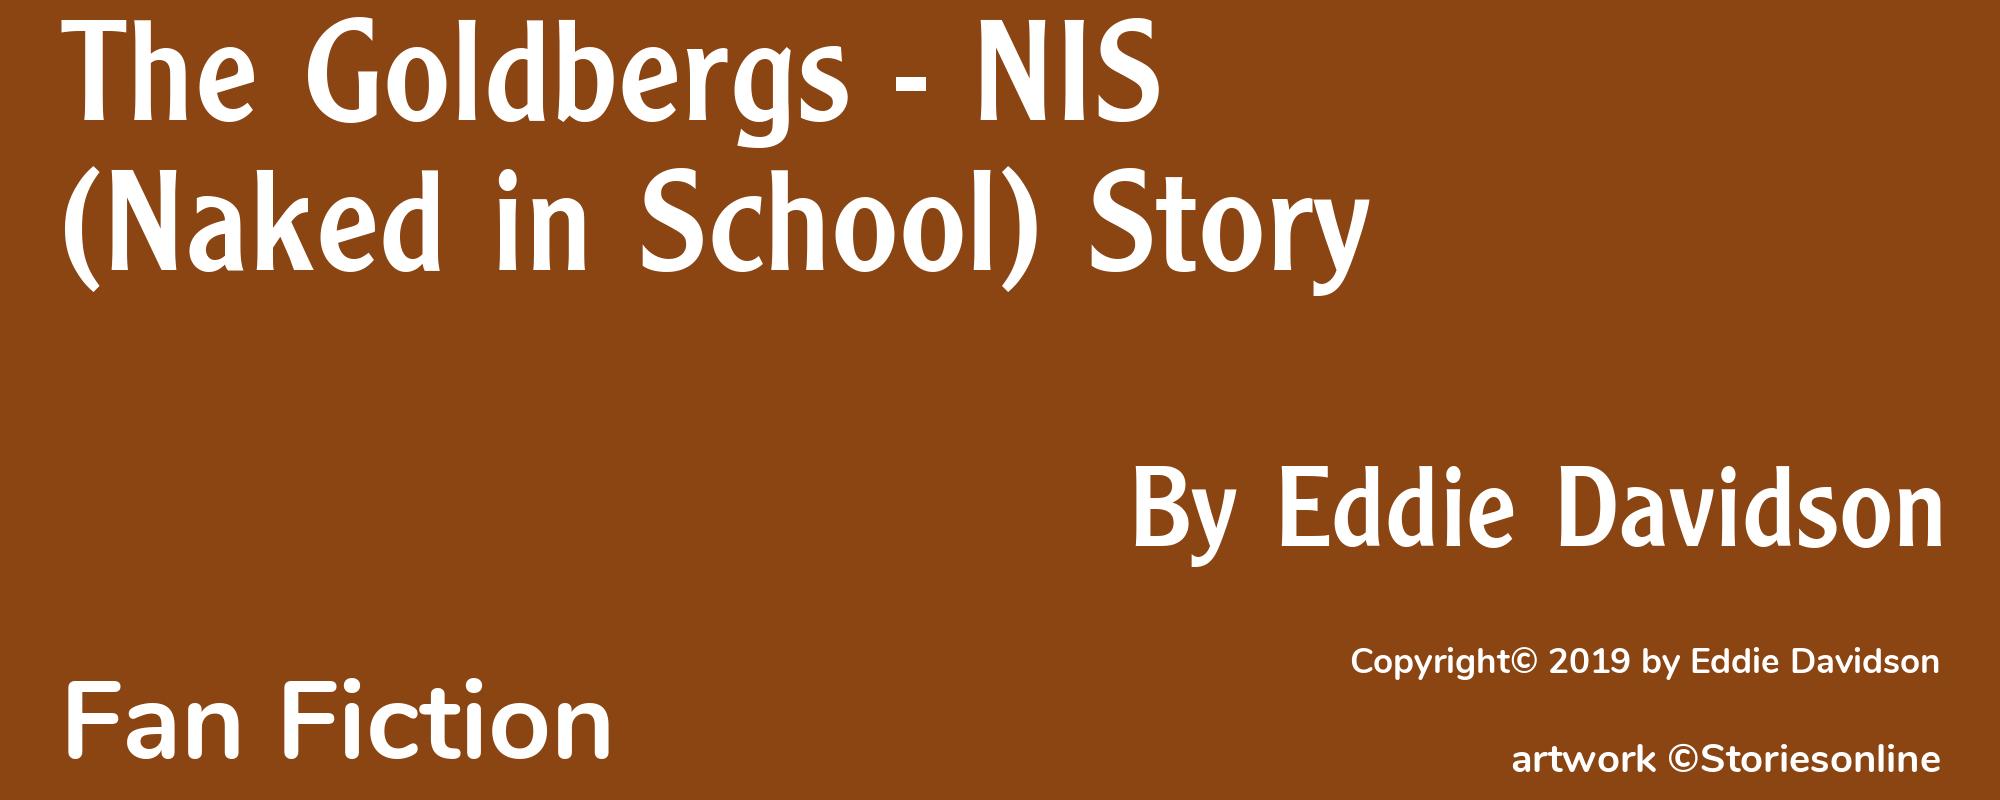 The Goldbergs - NIS (Naked in School) Story - Cover